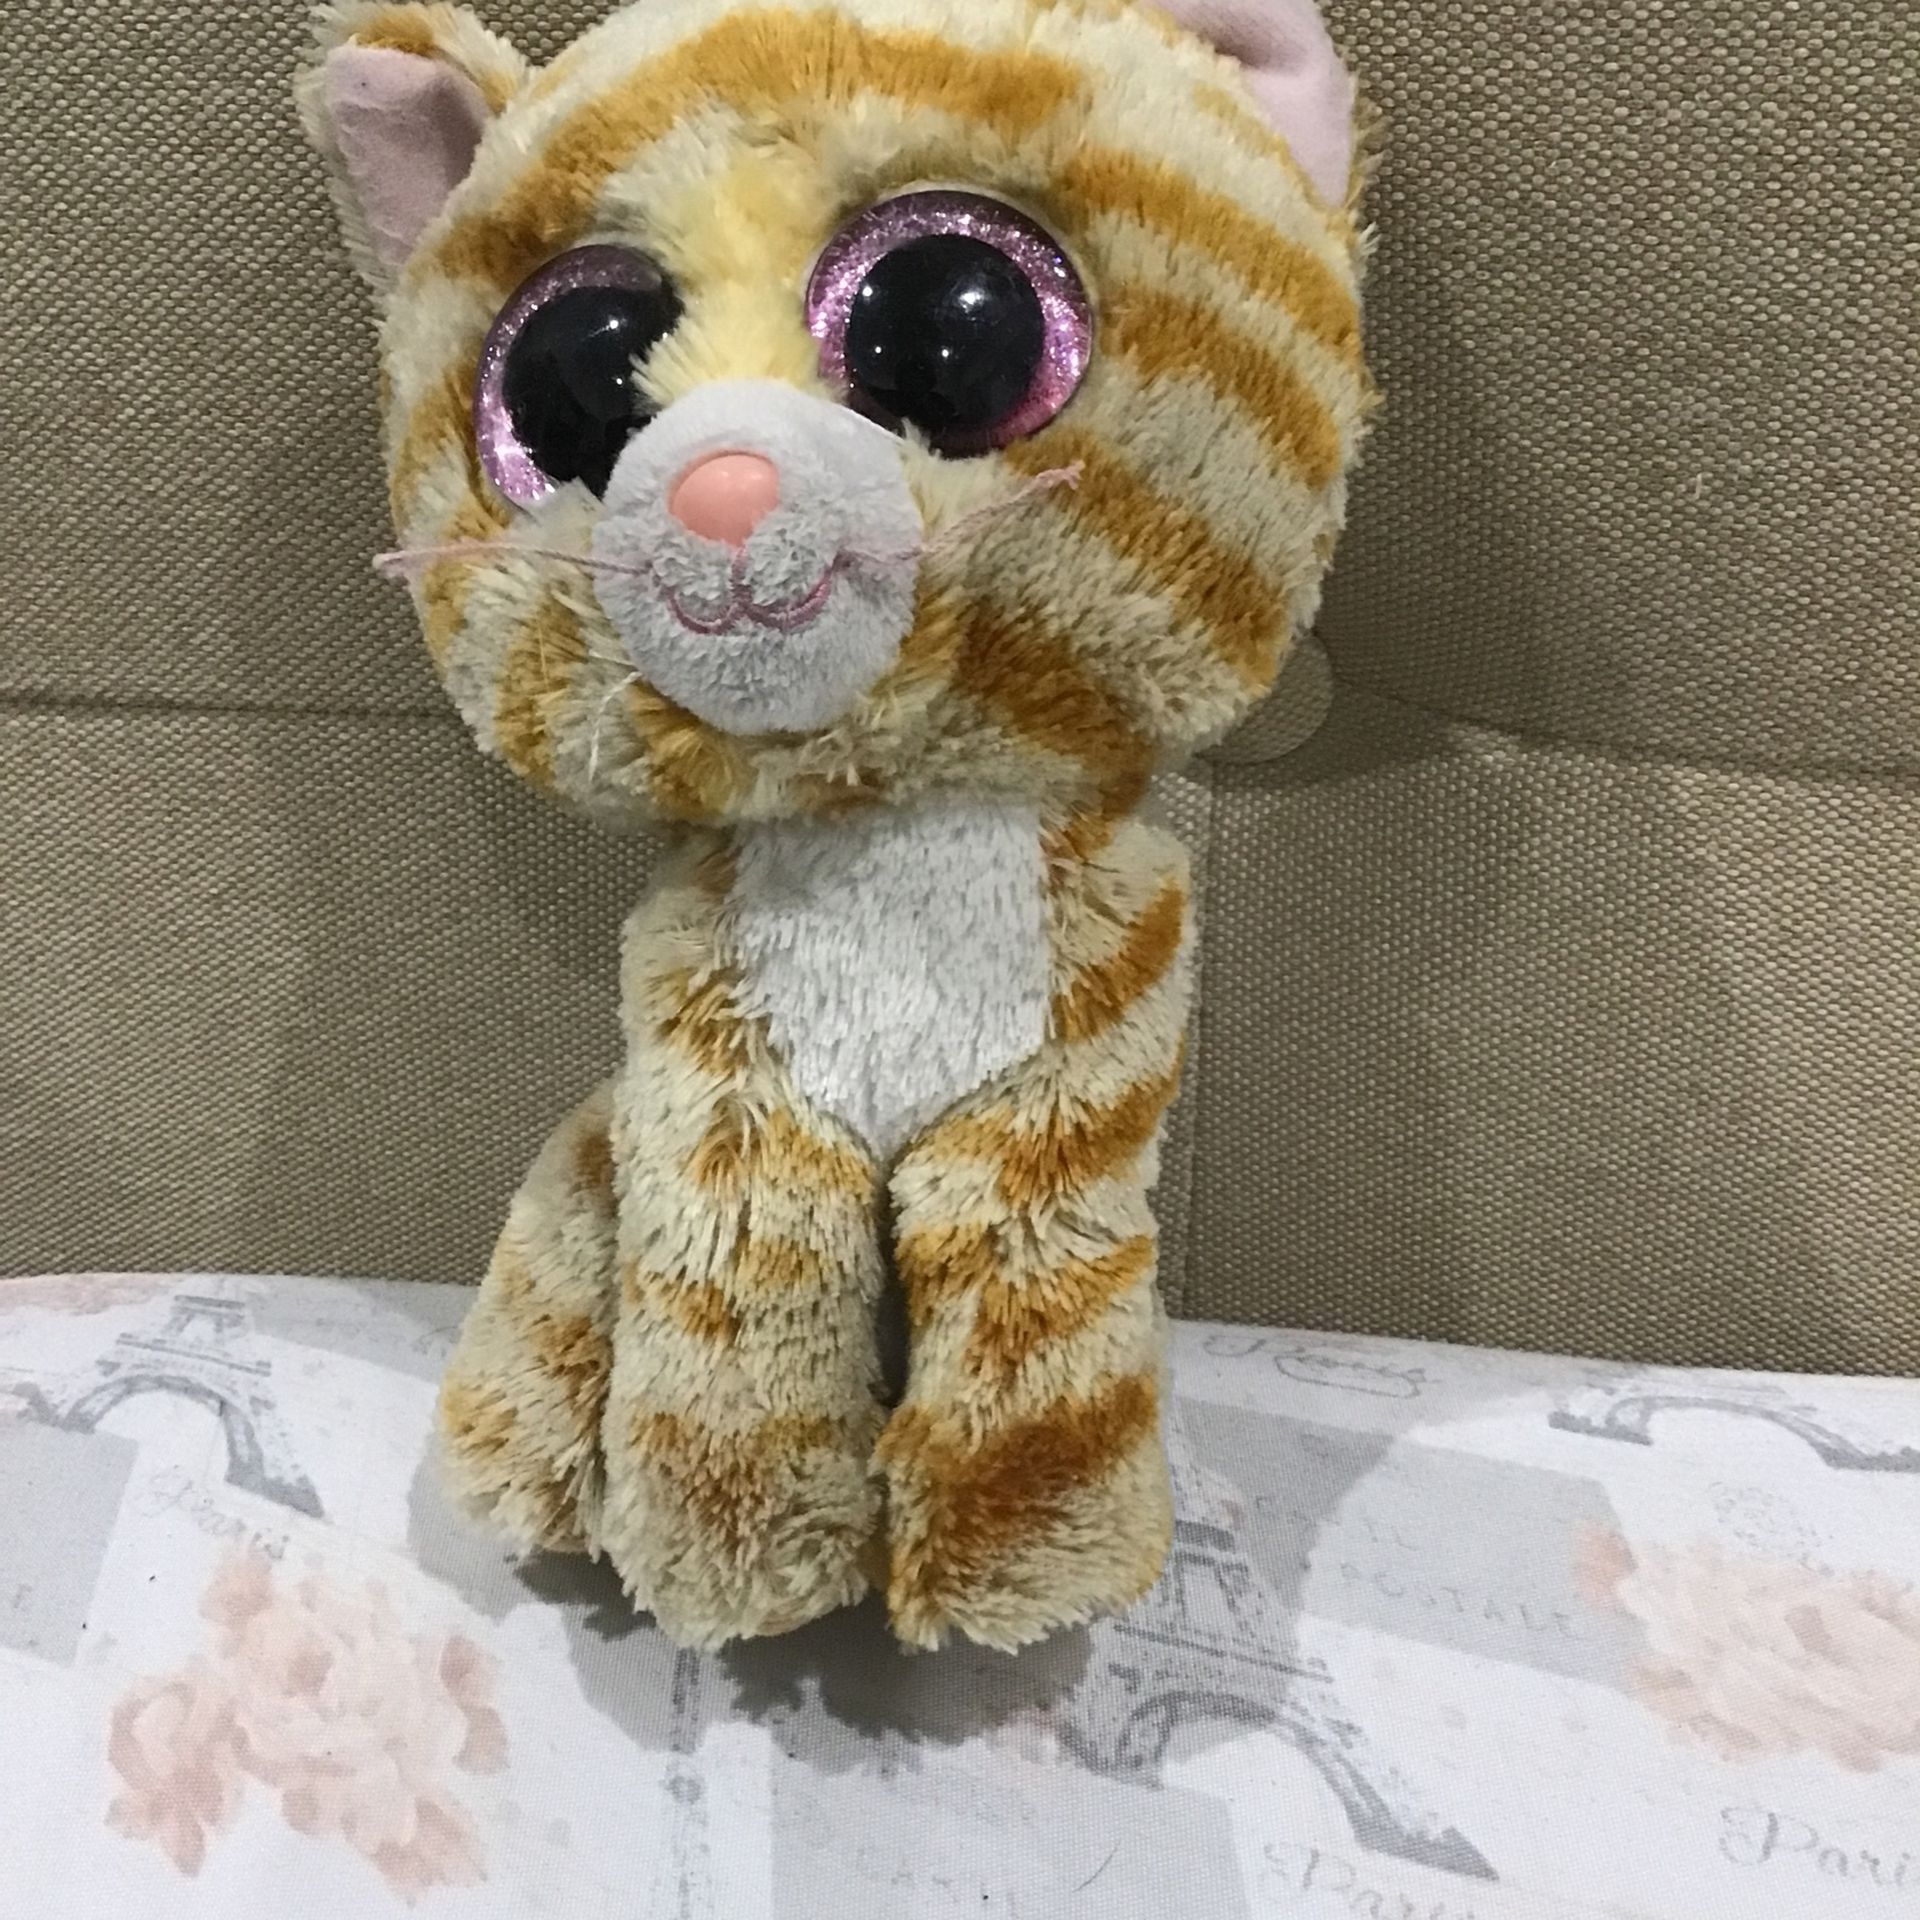 Yellow and brown beanie boo cat